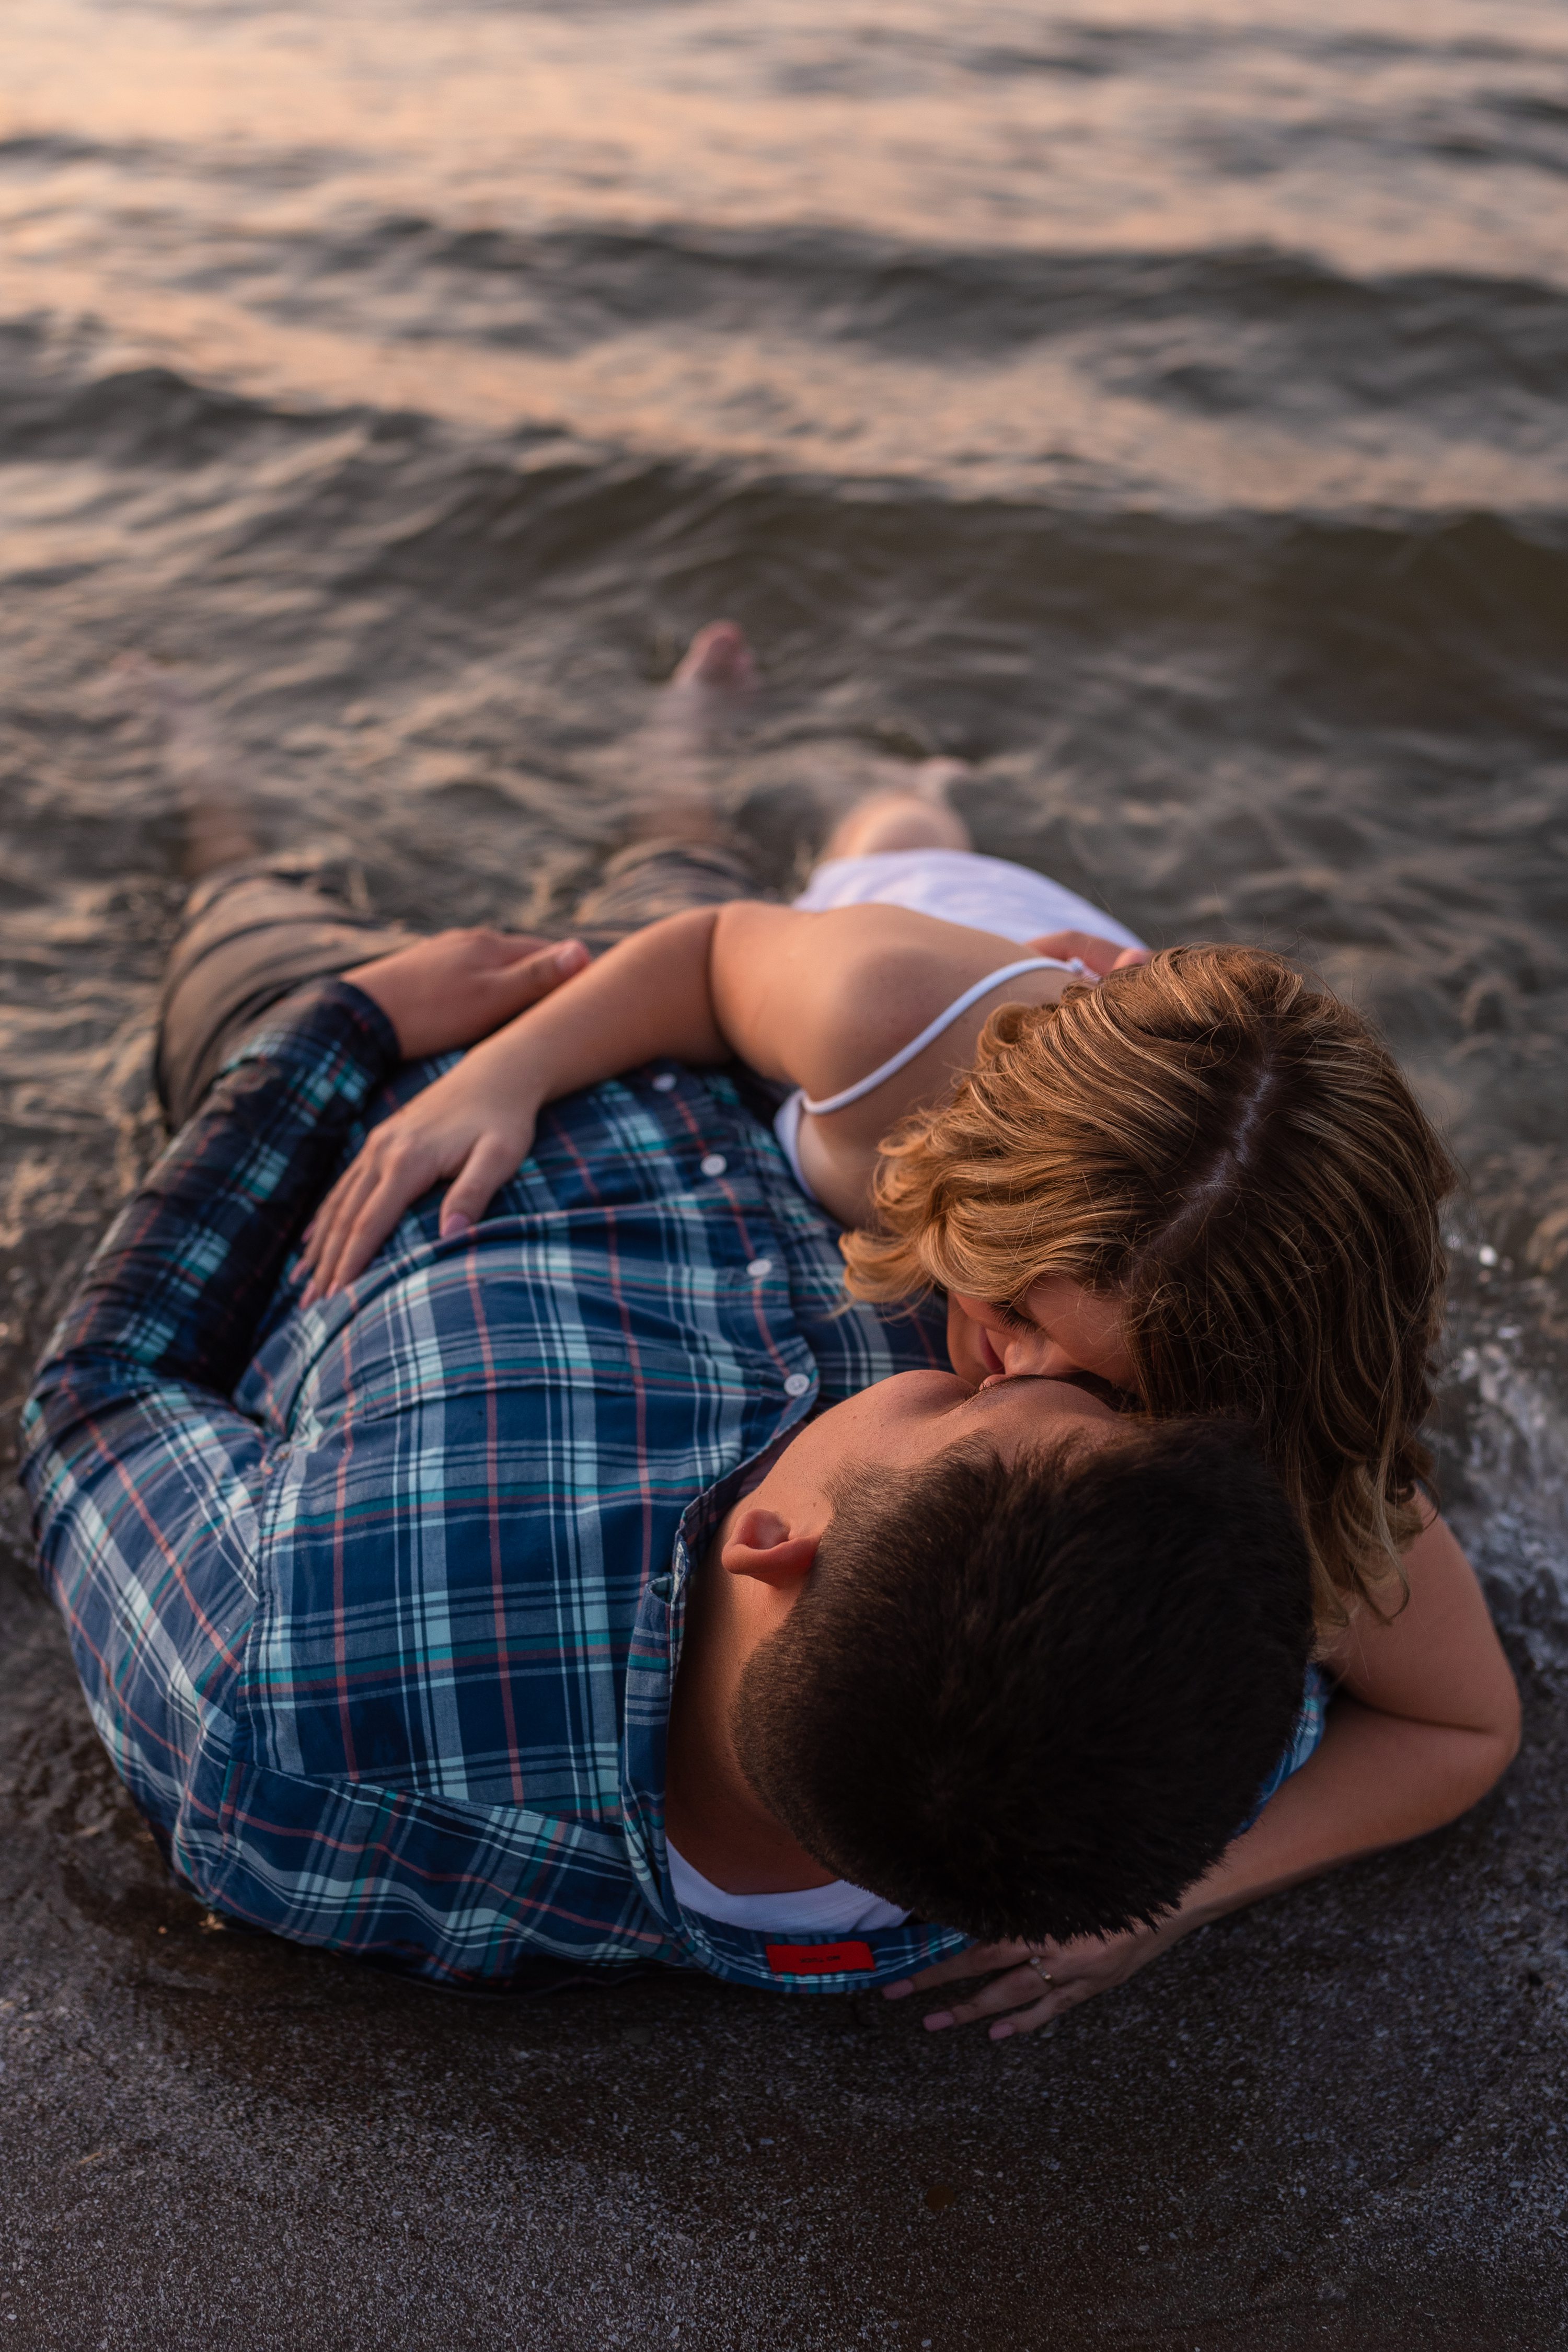 Cleveland Photographer, Downtown Cleveland, Engagement Photographer, Engagement Session, Hannah + Tyler, Hannh and Tyler, Lake Erie, Lake Erie Engagement Session, Lake Erie photos, Ohio Photographer, Wedding Photographer, cleveland engagement photographer, couple in lake, couple in water, couples session, couples session in water, ohio engagement photographer, photos in water, sunset photos